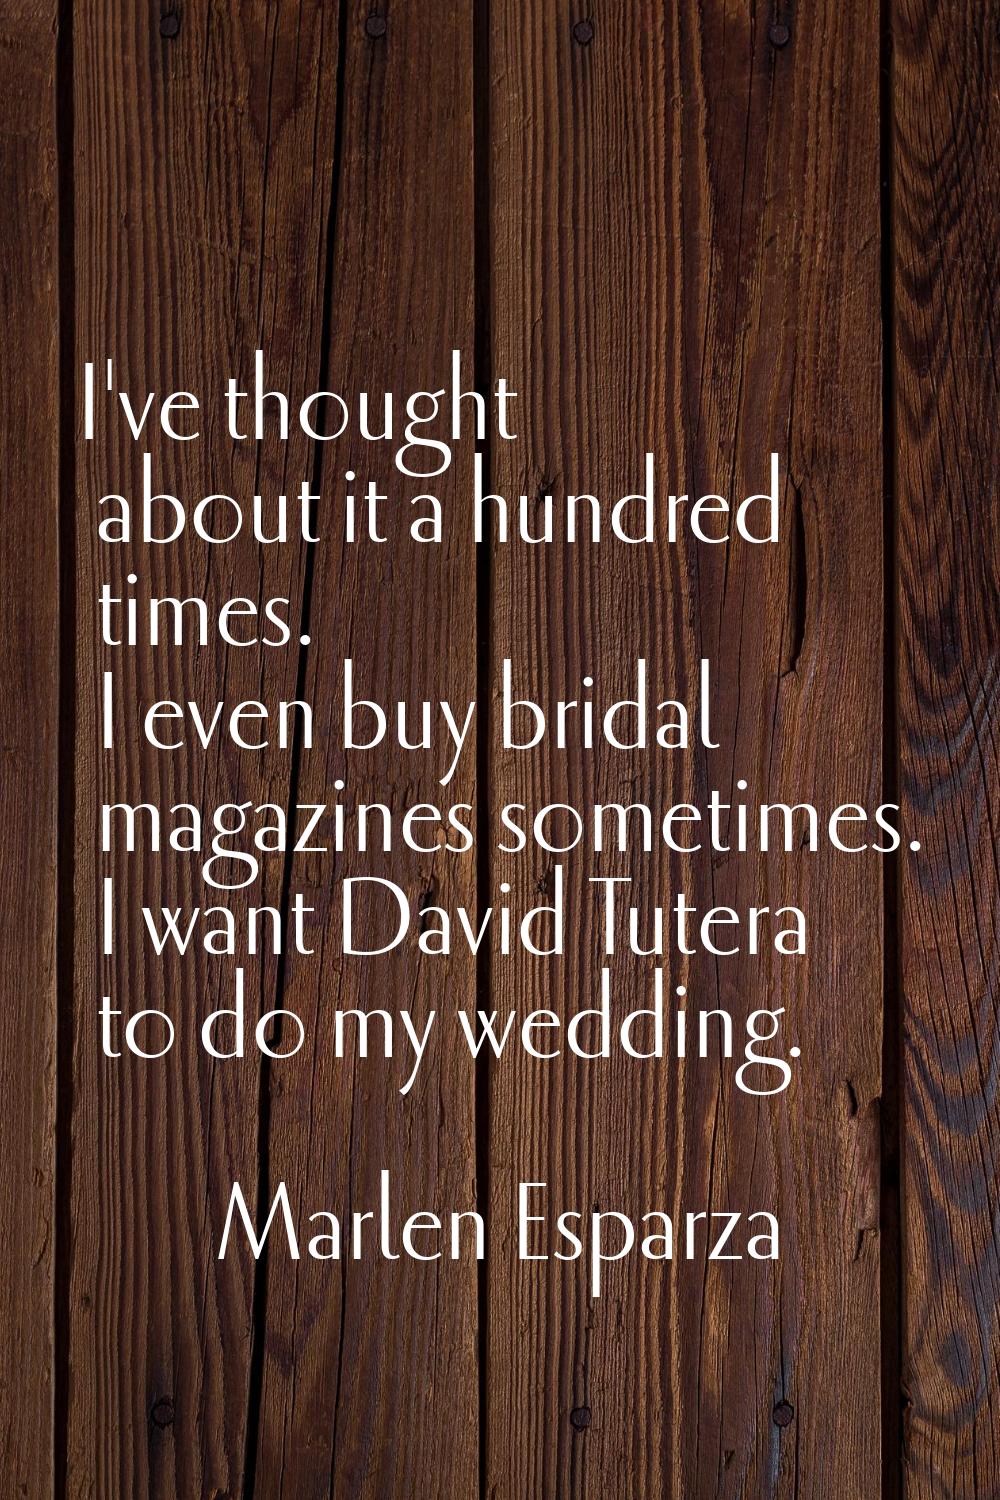 I've thought about it a hundred times. I even buy bridal magazines sometimes. I want David Tutera t